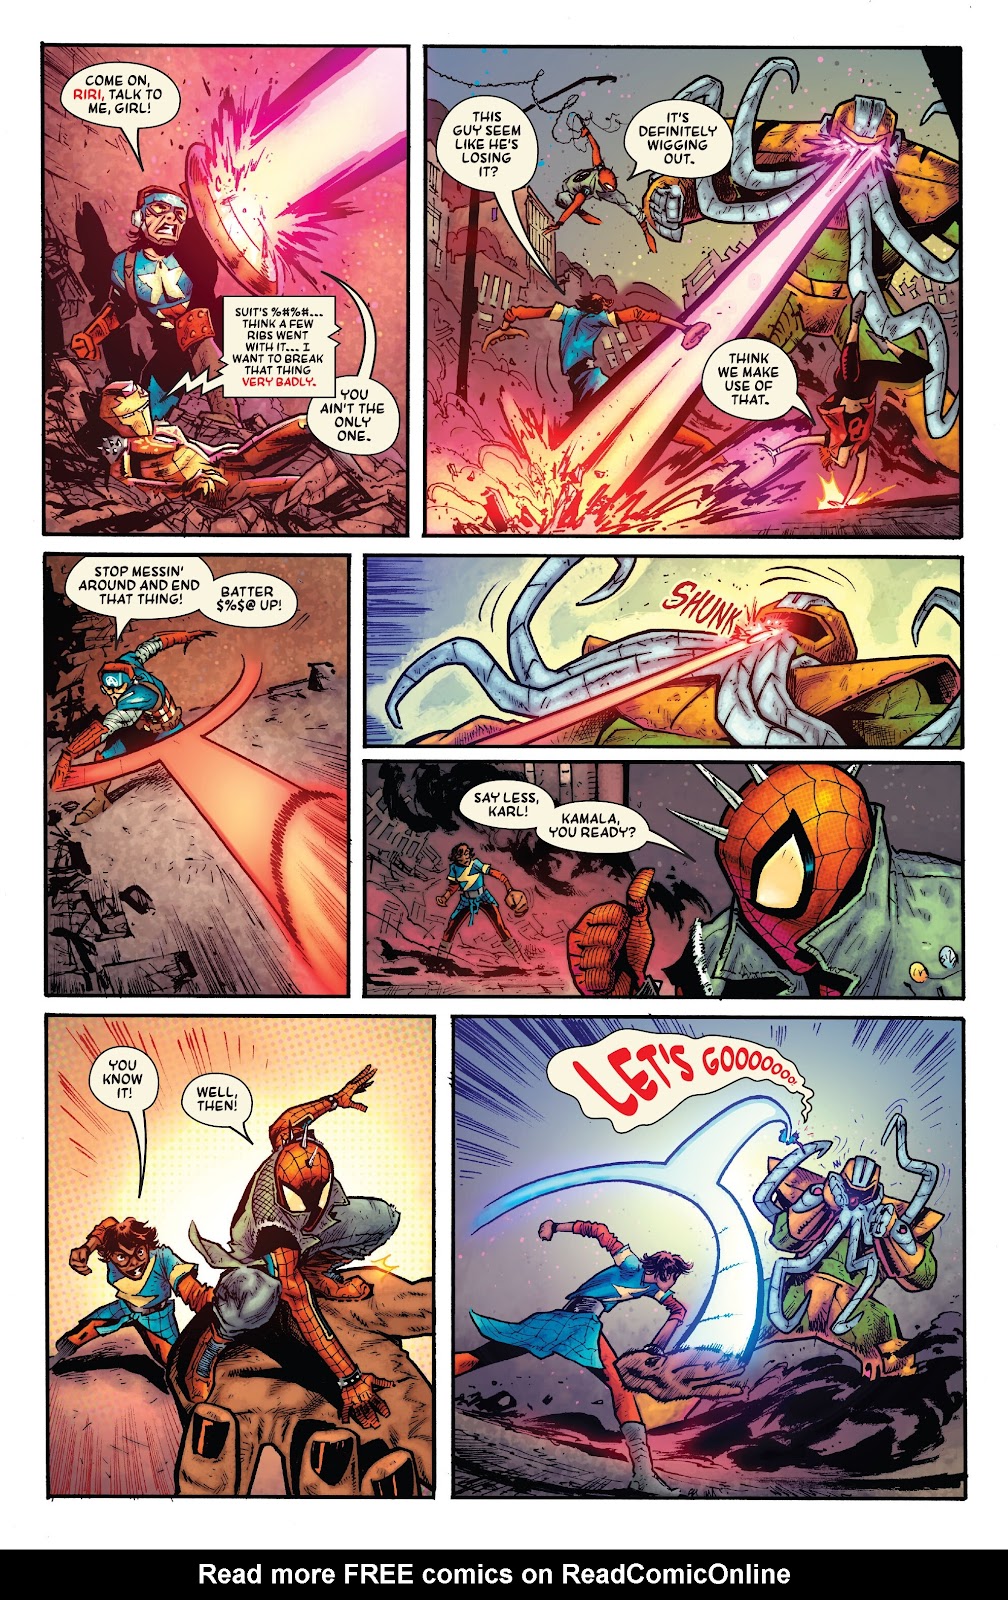 Spider-Punk: Arms Race issue 1 - Page 22